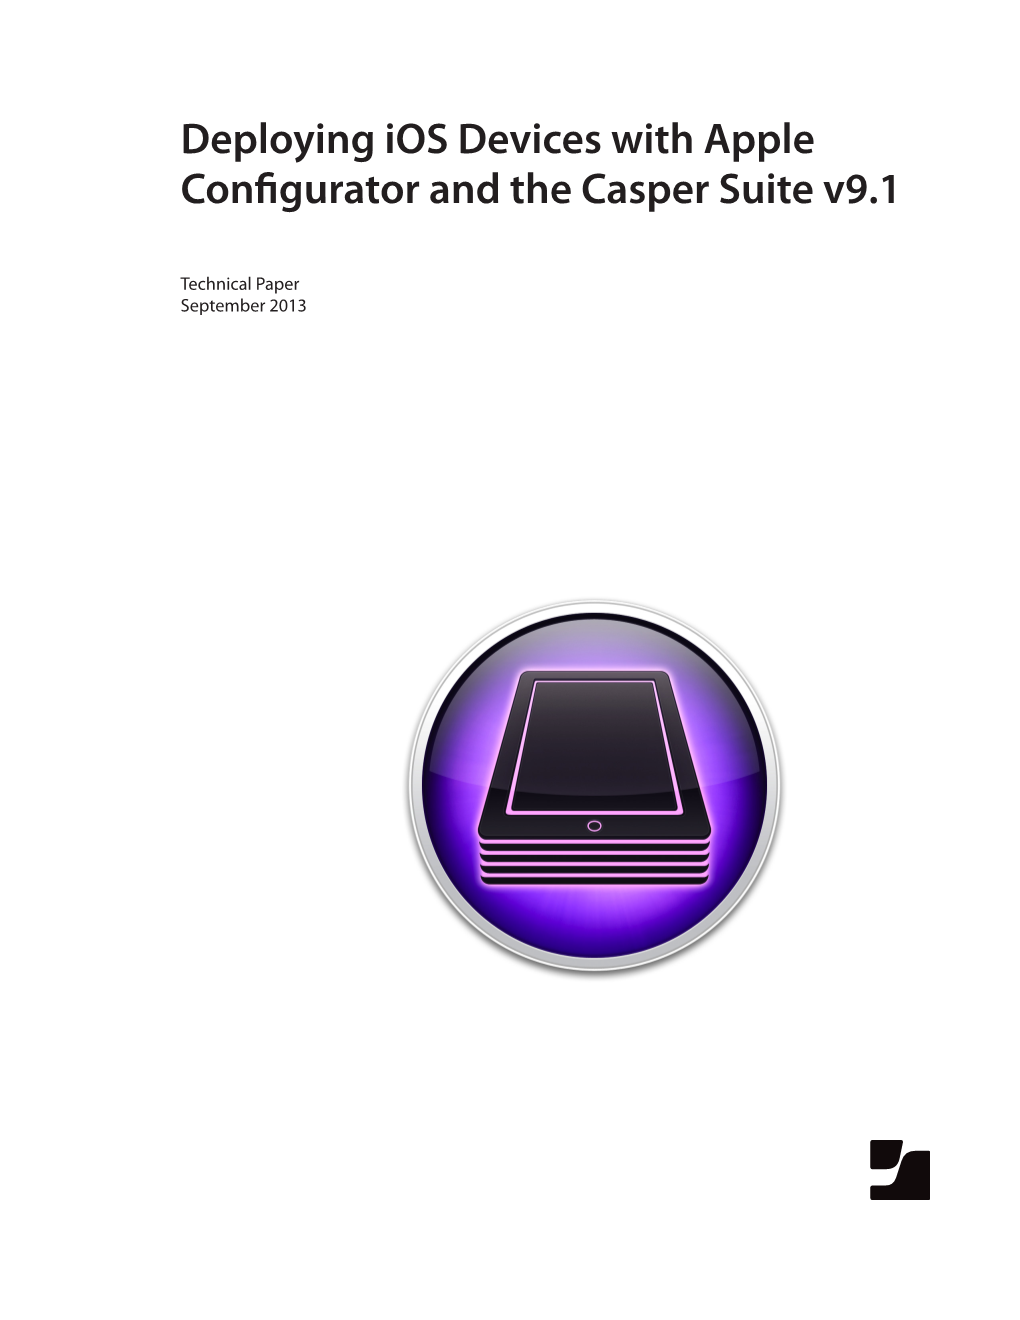 Deploying Ios Devices with Apple Configurator and the Casper Suite V9.1